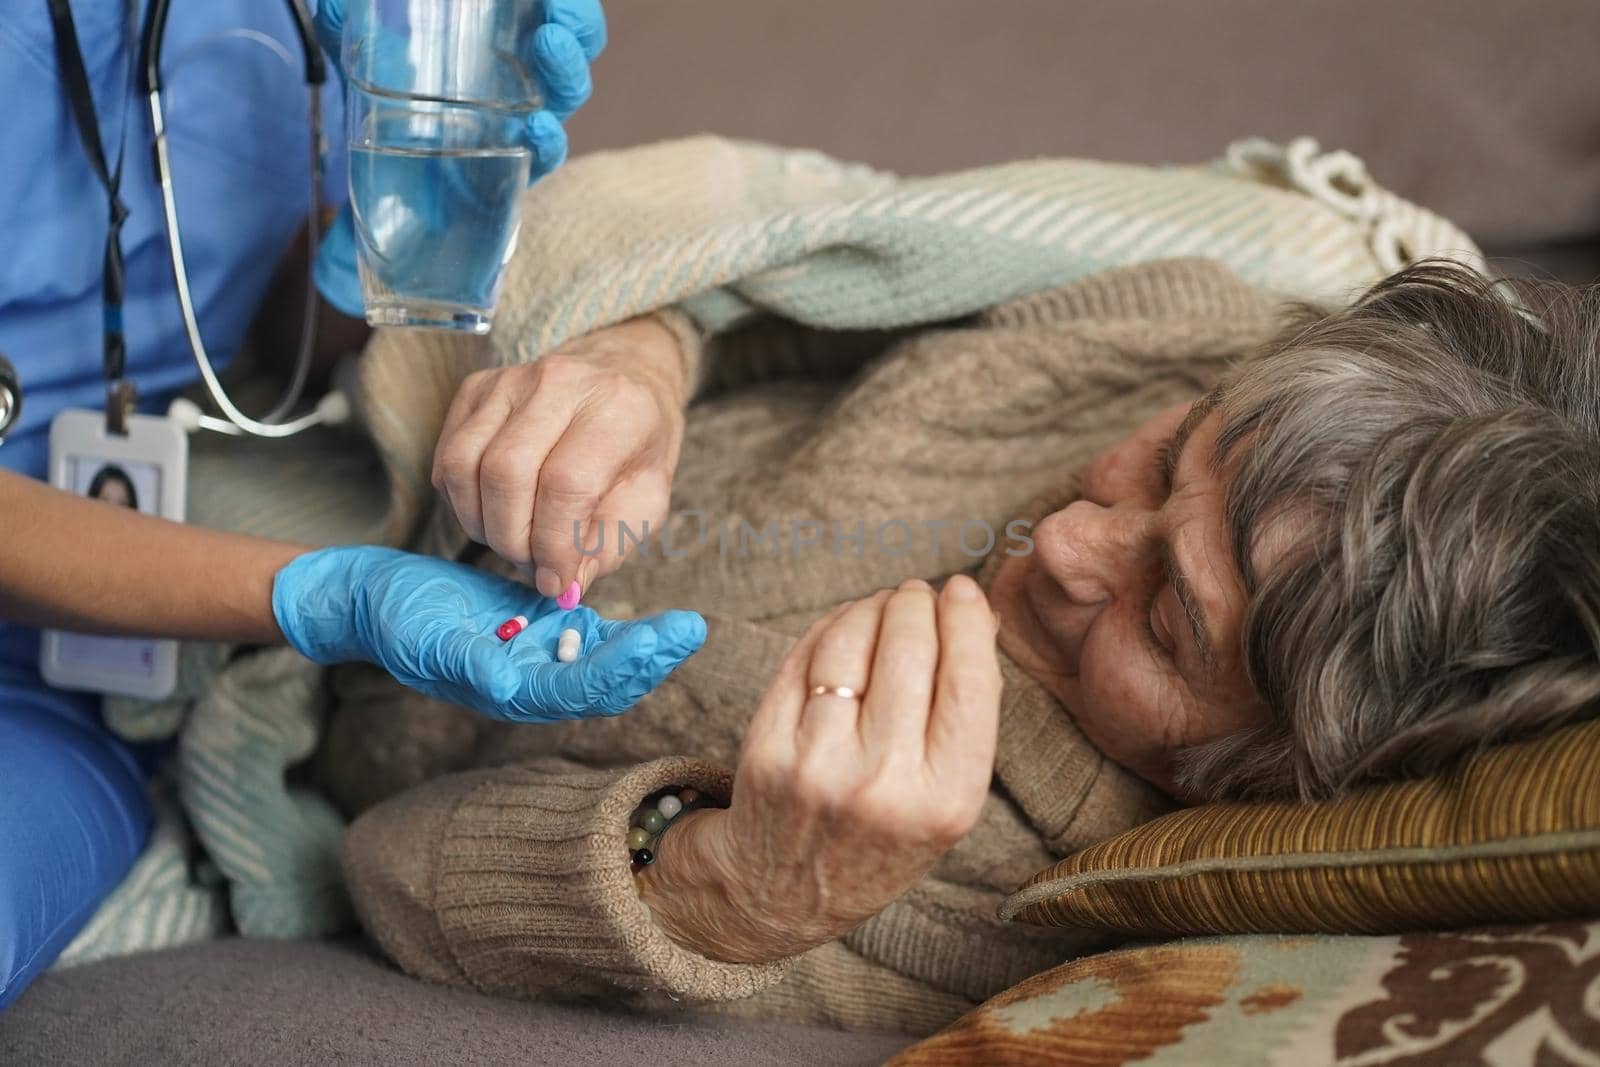 A young nurse is caring for an elderly 80-year-old woman at home. She holds a glass of water and gives medicine pills a pensioner retired woman who lies and rests in bed.